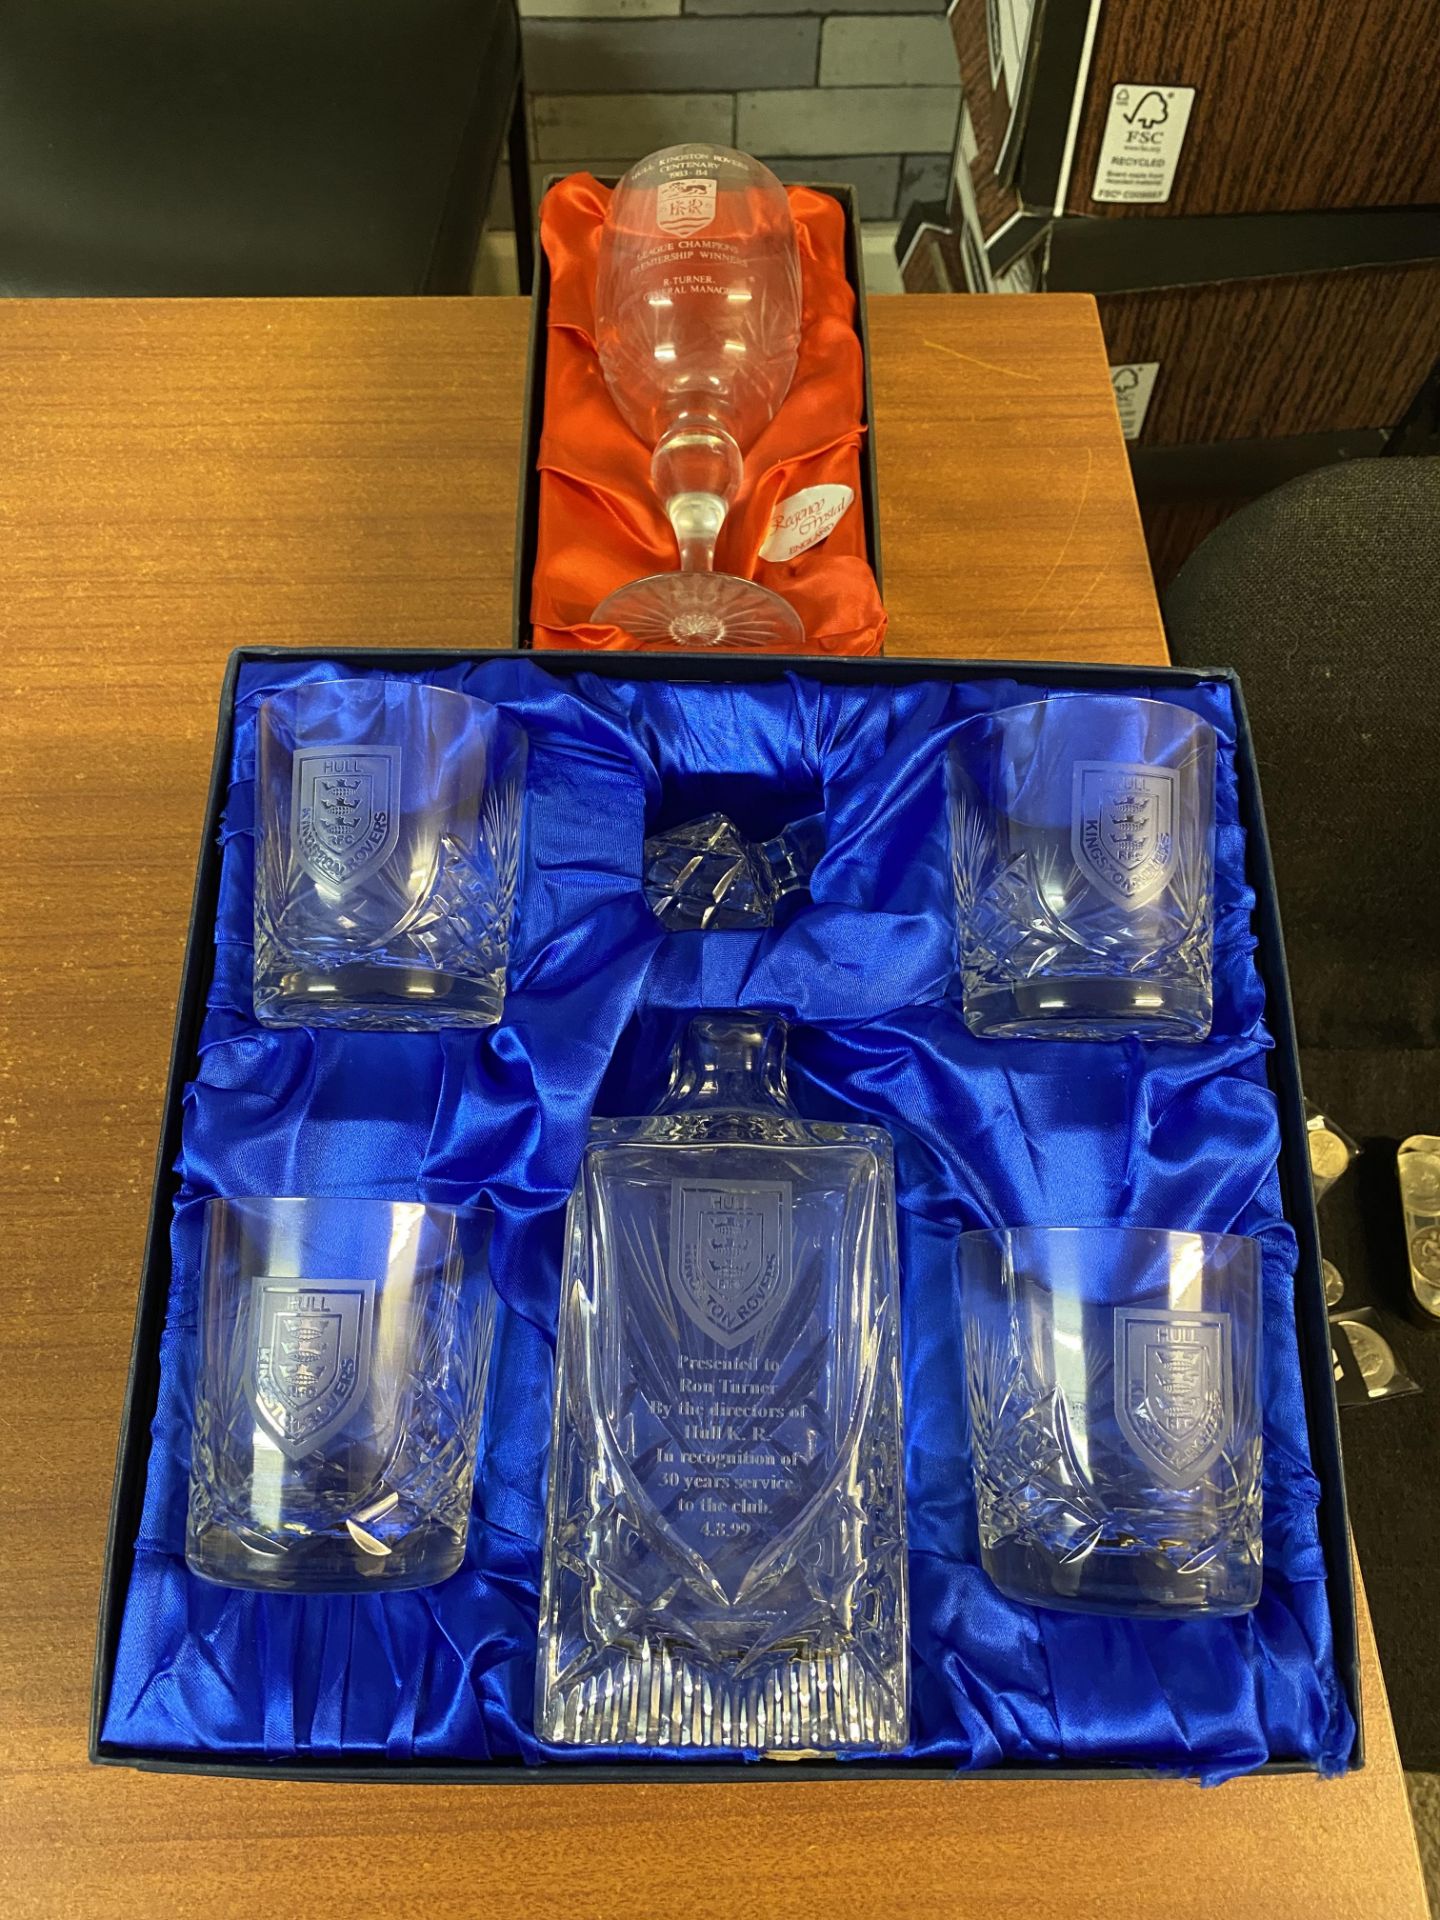 Hull KR decater & tumbler glasses & league championship wine glass